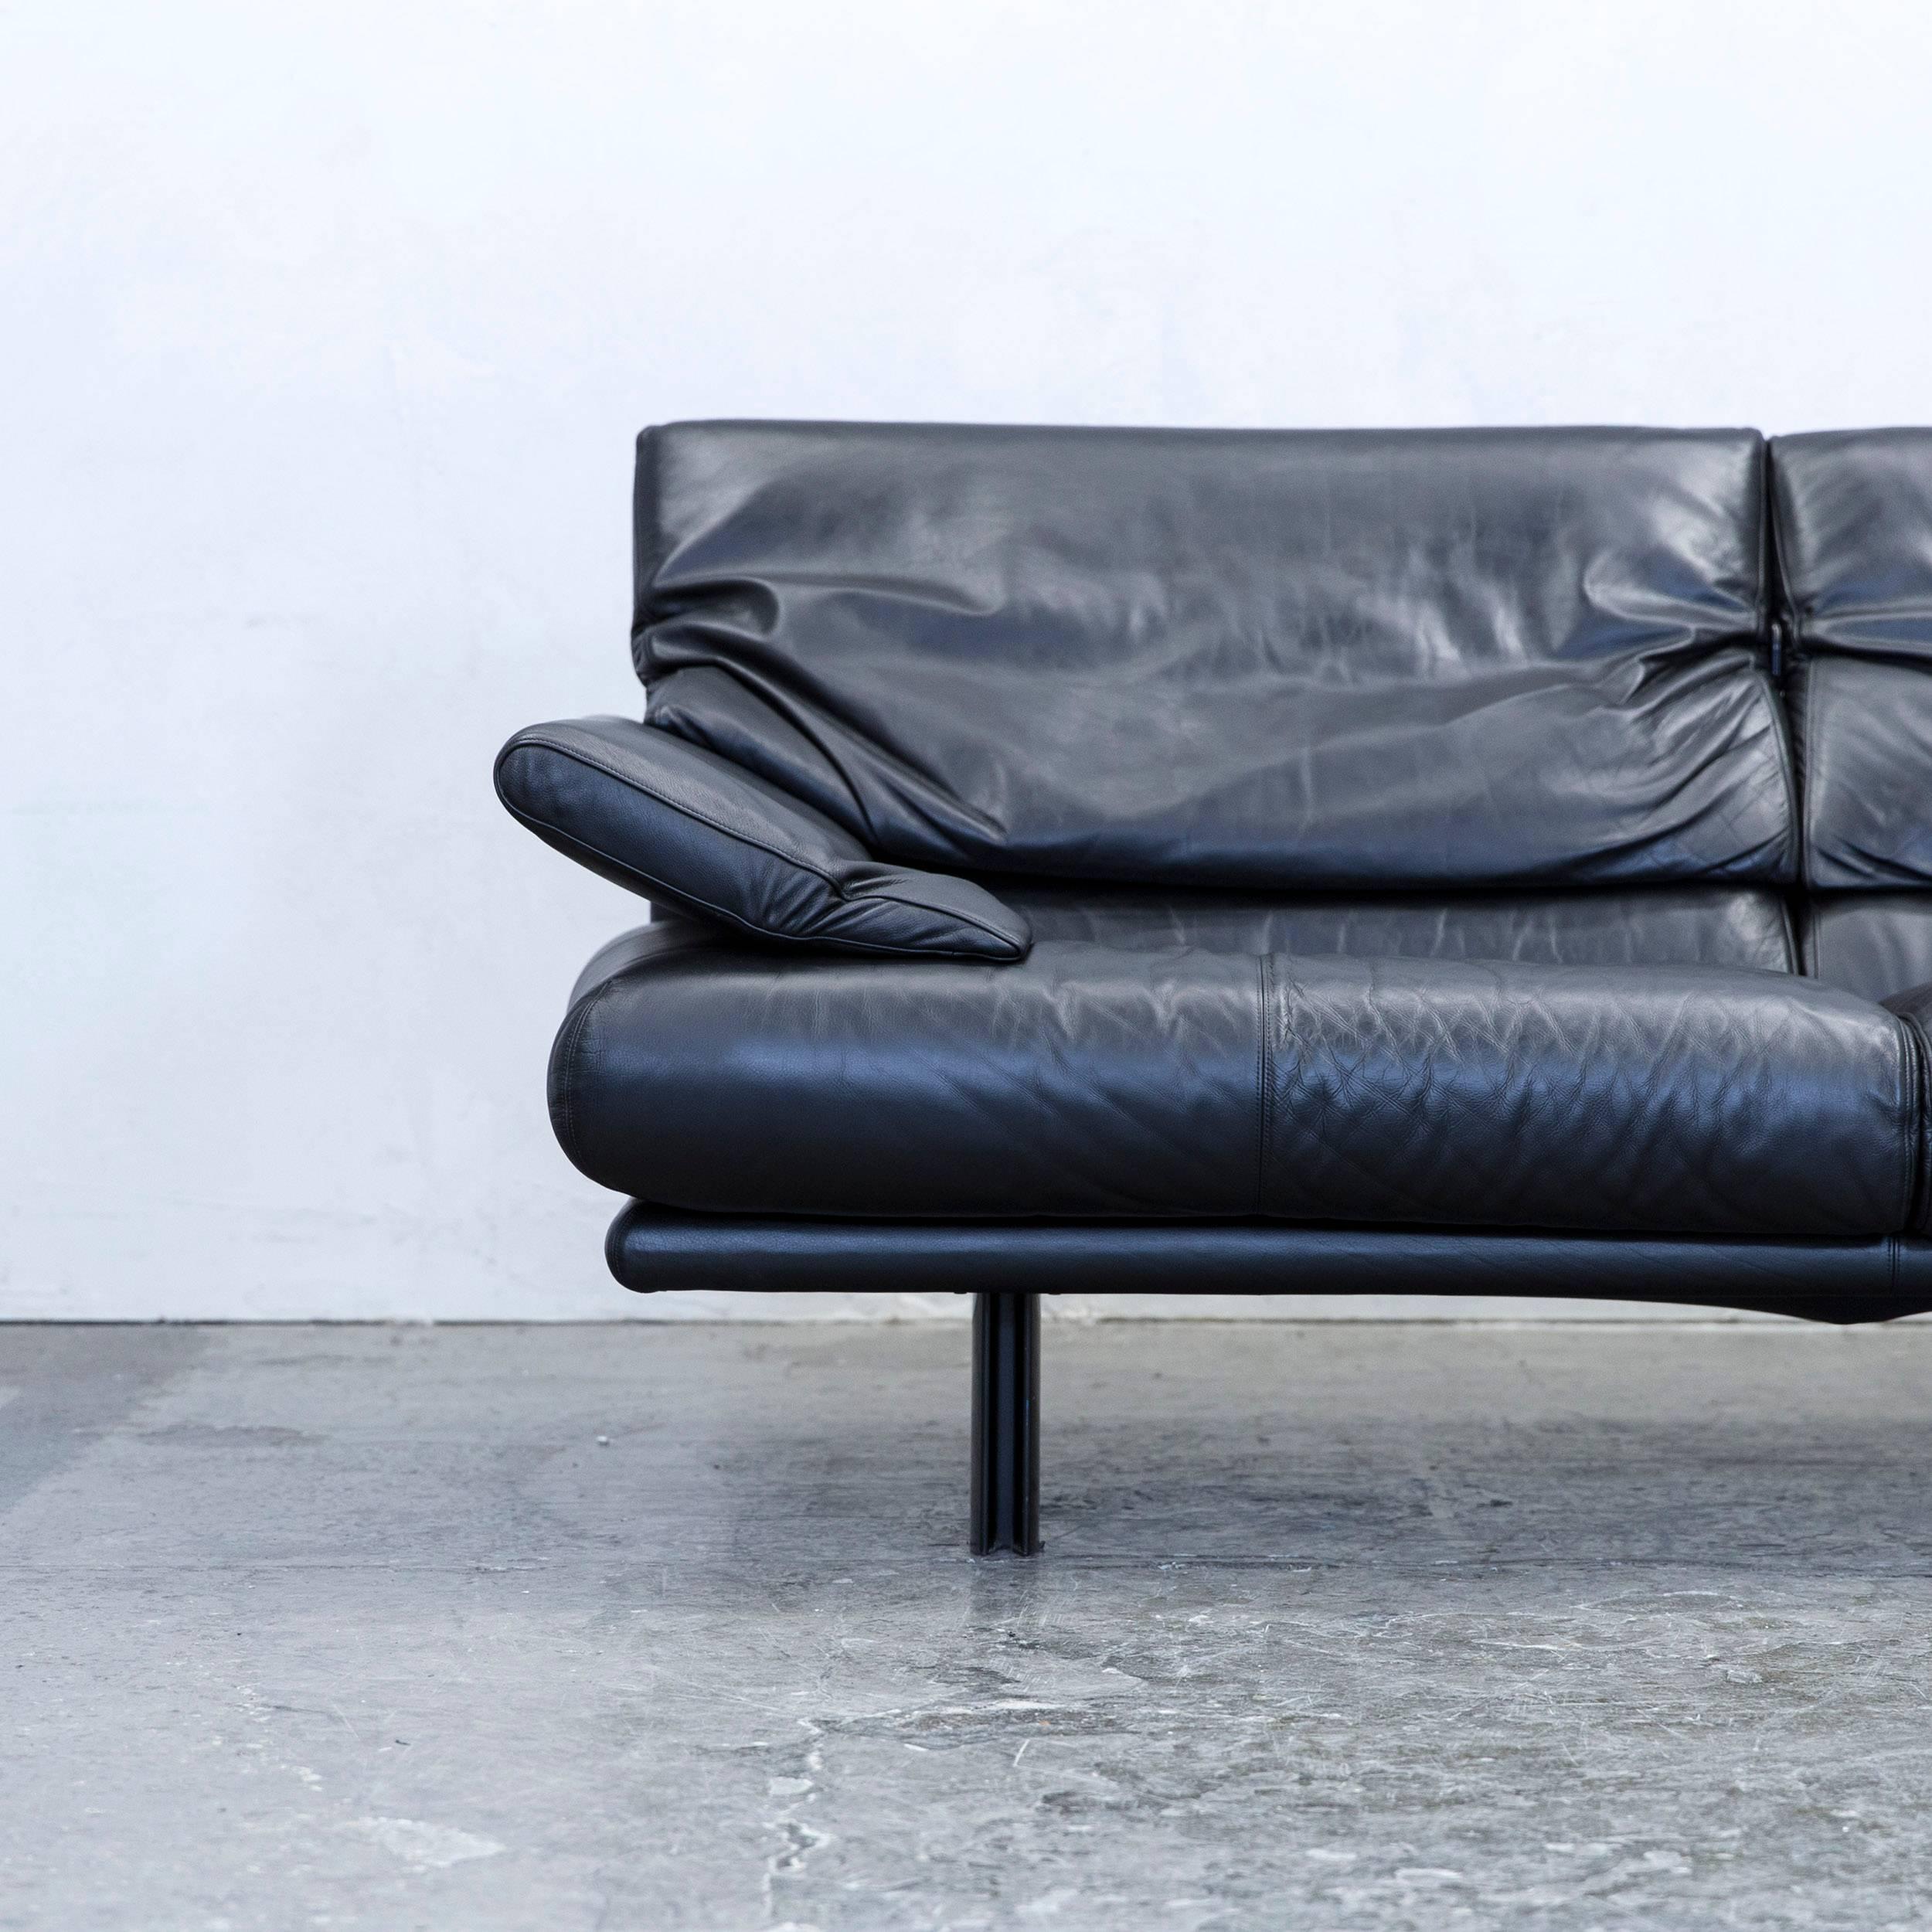 Black colored original B&B Italia Alanda designer leather sofa in a minimalistic and modern design, with convenient functions, made for pure comfort and flexibility.